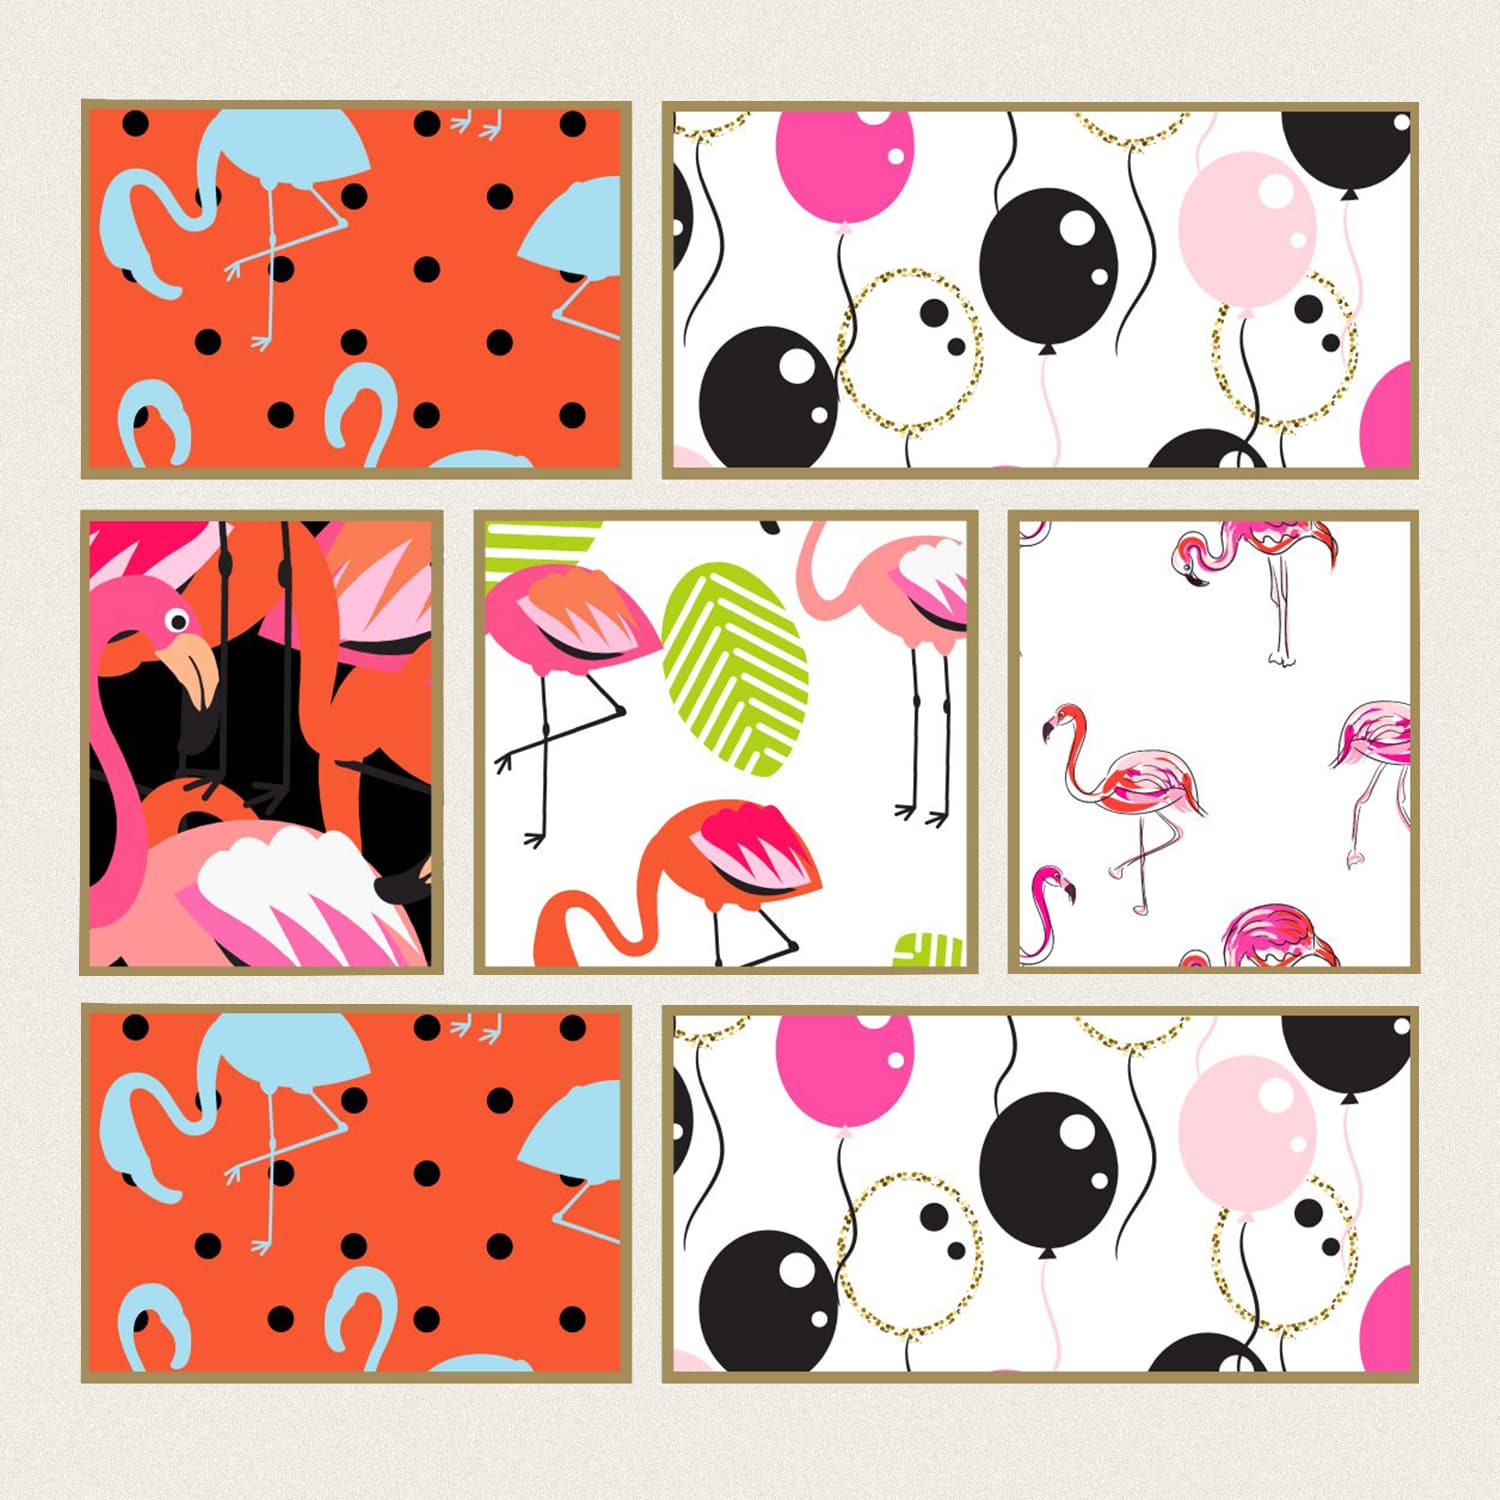 Flamingo Seamless Patterns cover.